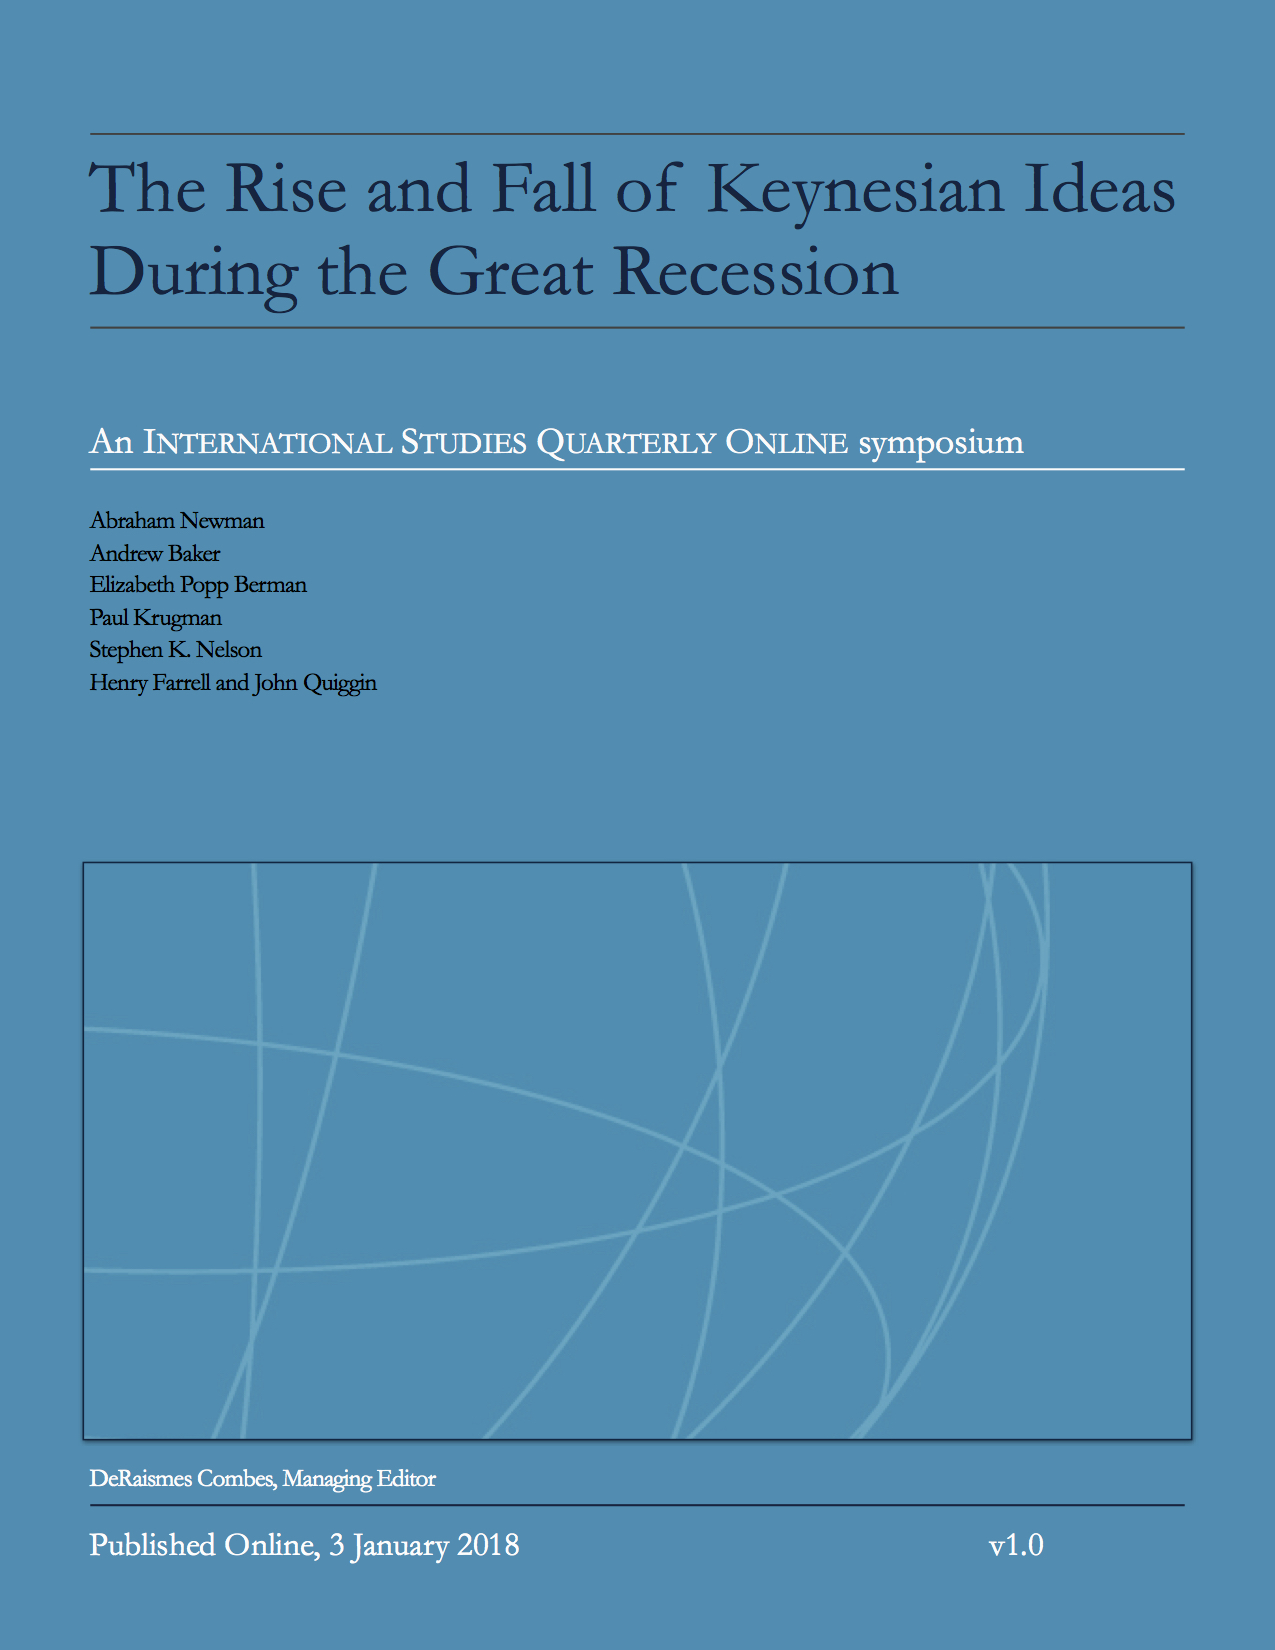 The Rise and Fall of Keynesian Ideas During the Great Recession